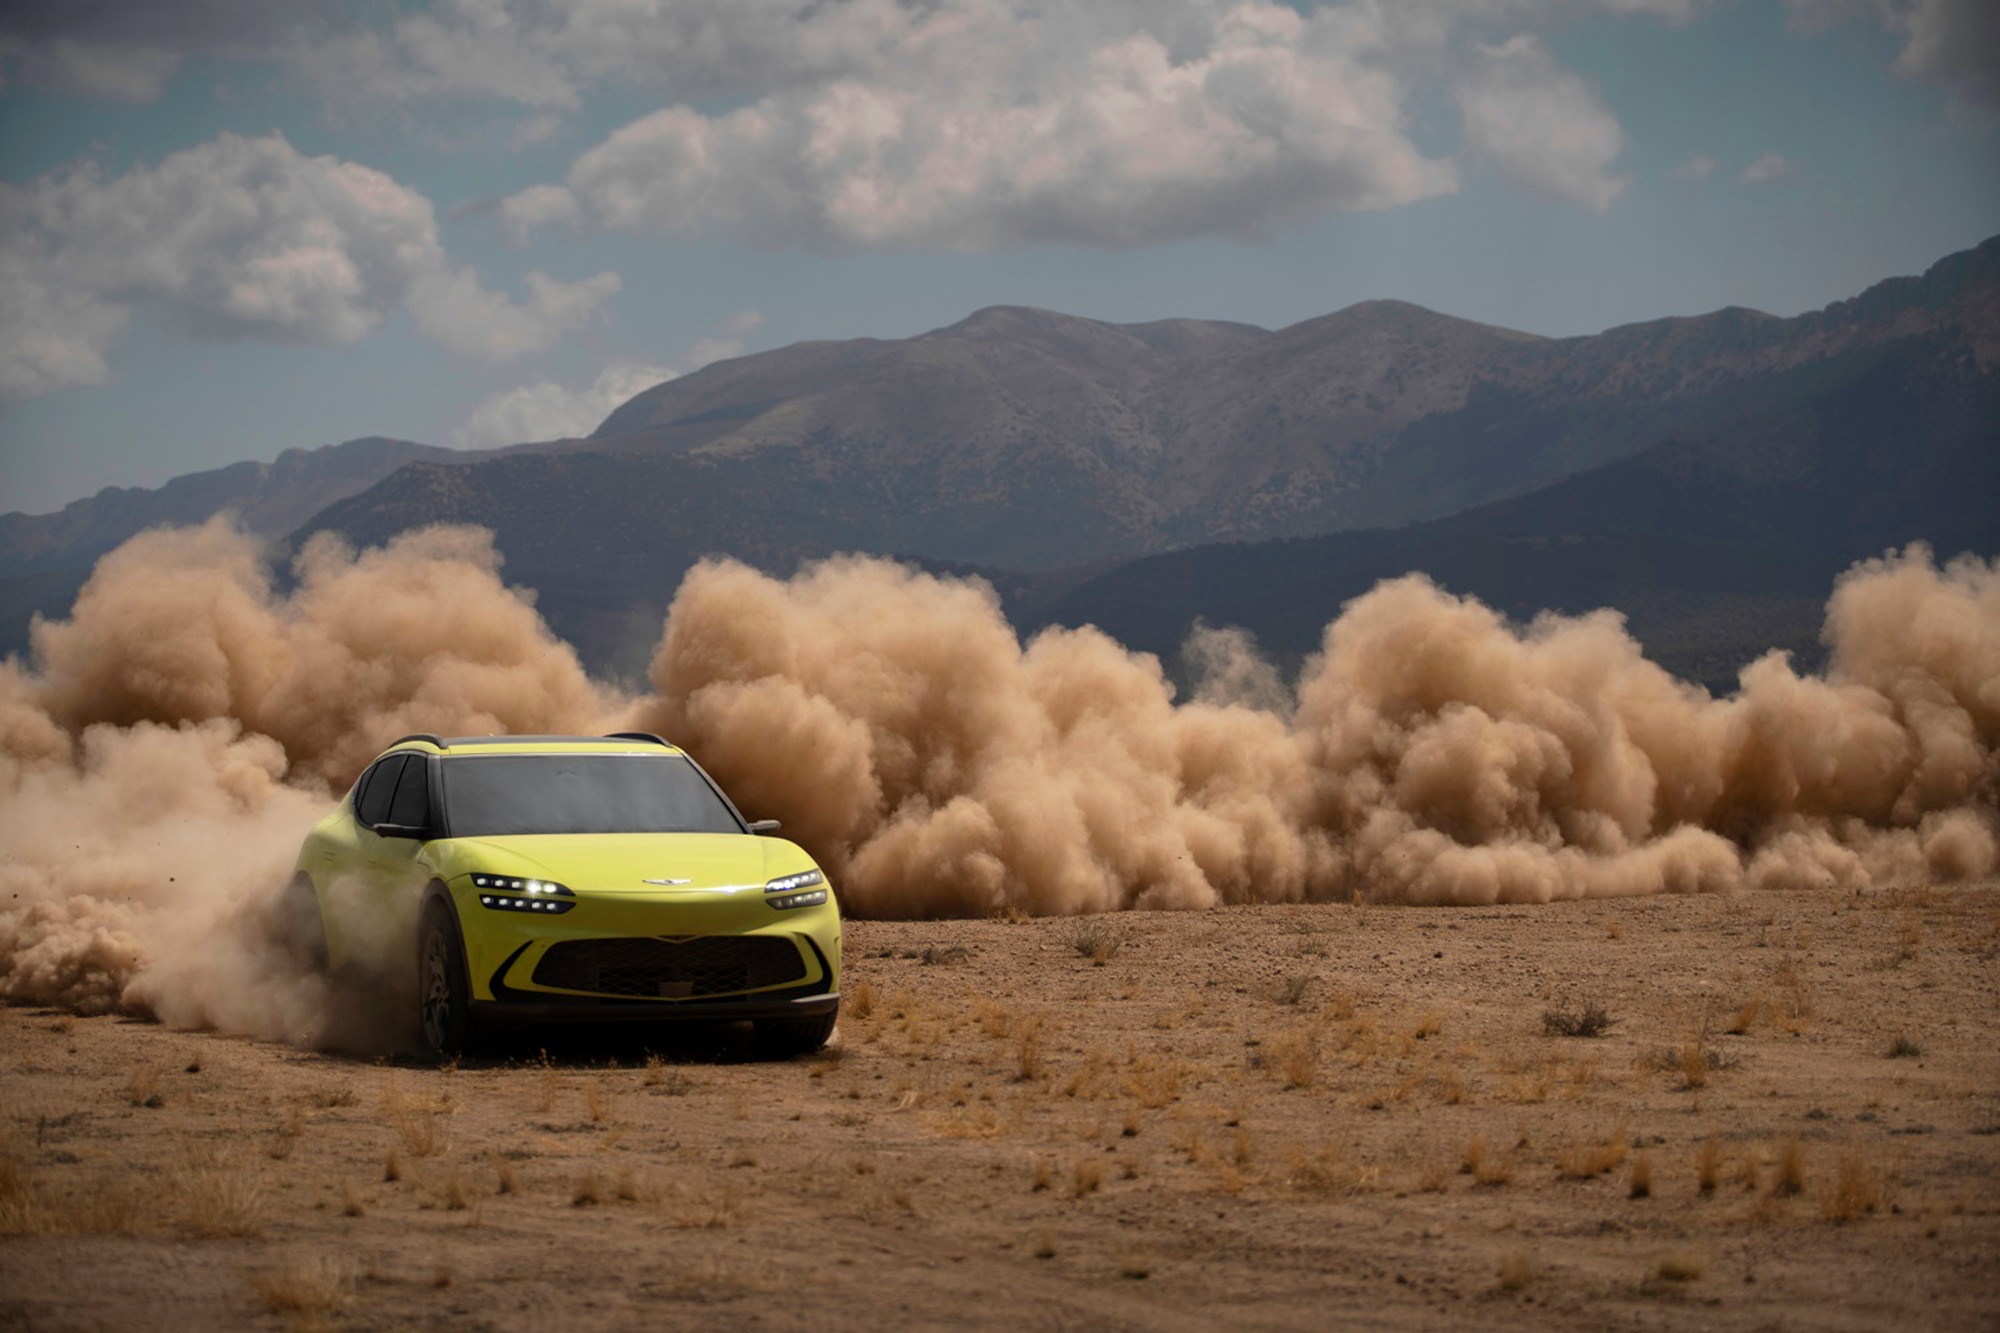 Sao Paulo Lime Genesis GV60 EV driving and creating the sandstorm by the mountains